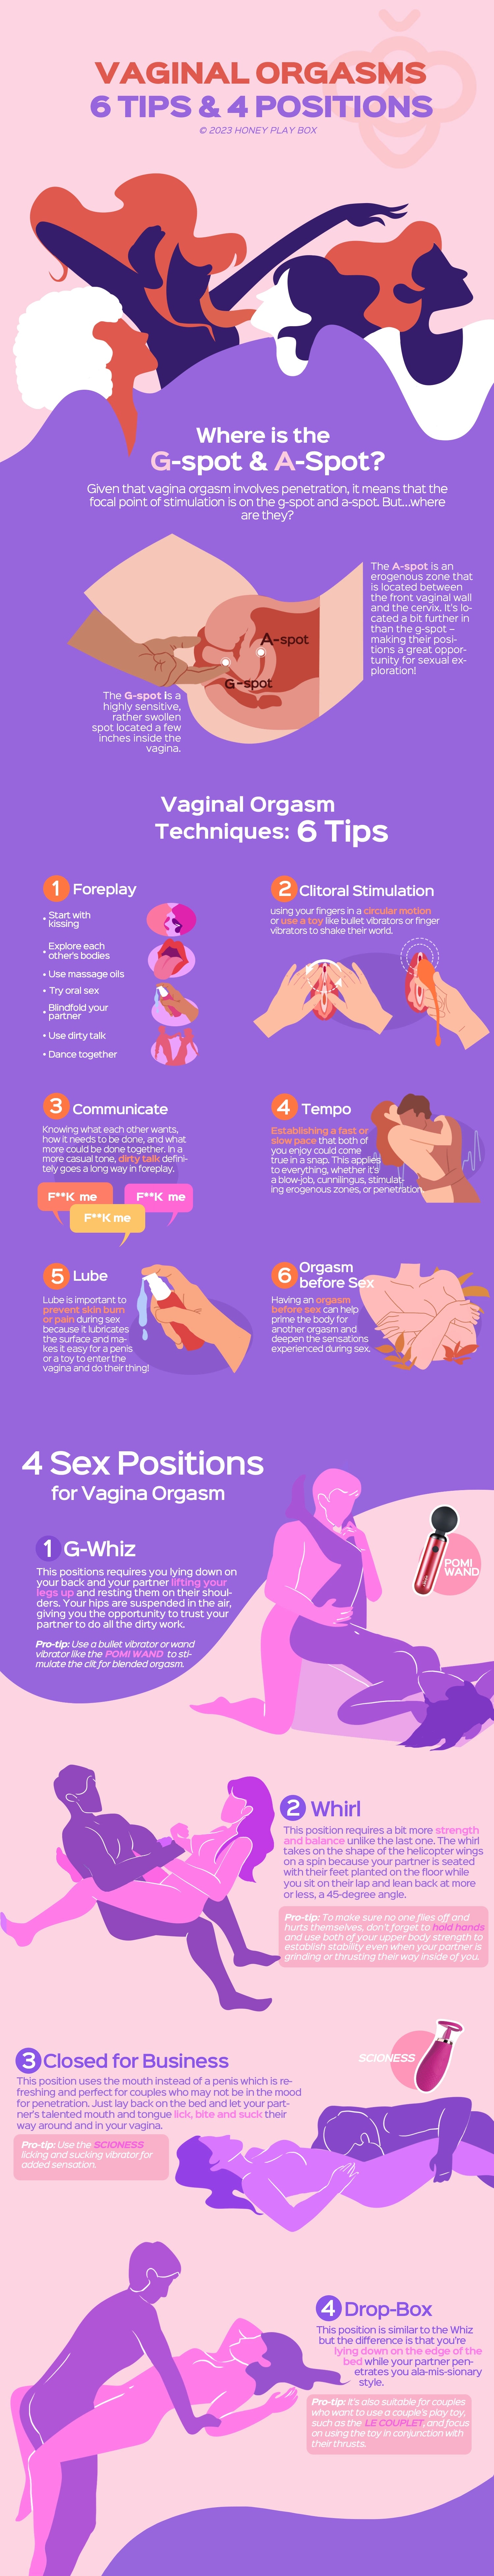 Vaginal Orgasms An Updated Classic with 6 Tips and 4 Positions